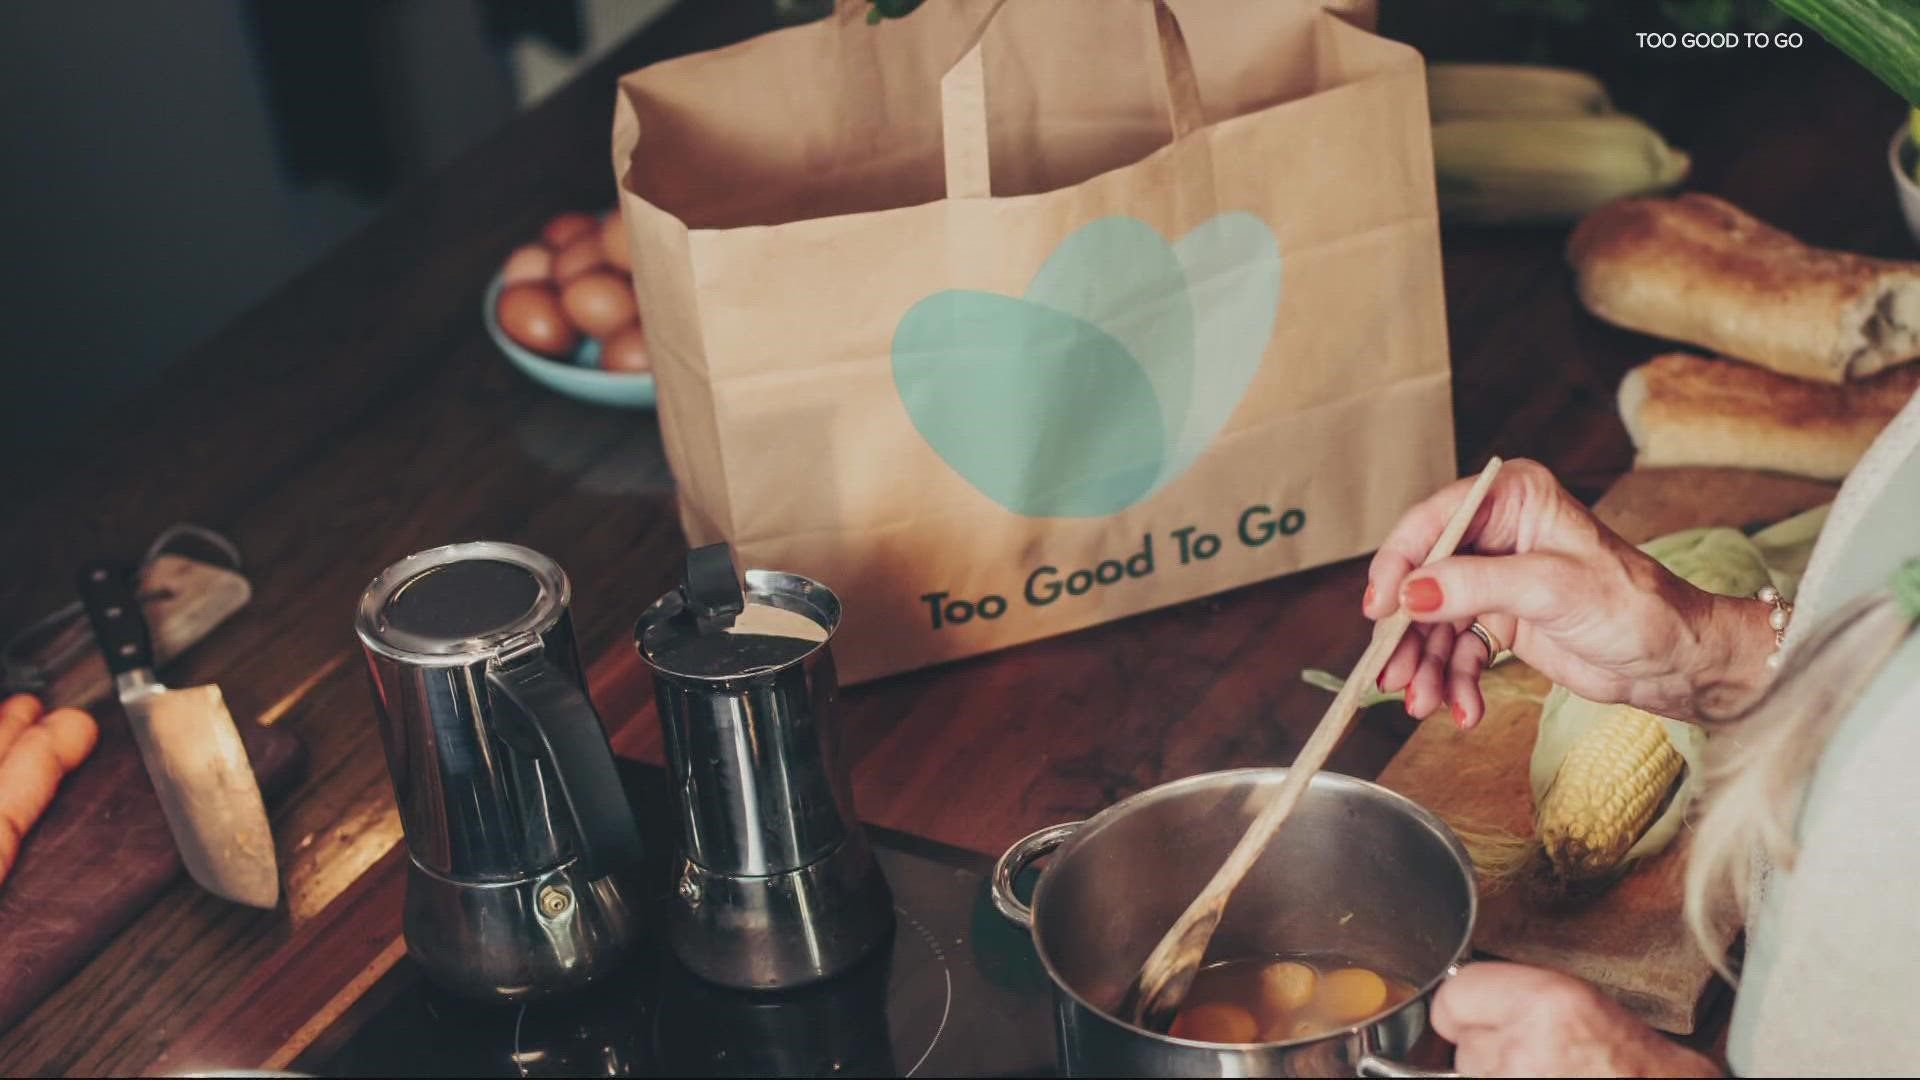 The "Too Good To Go" app launched in Portland in May 2021. The goal is to fight food waste.